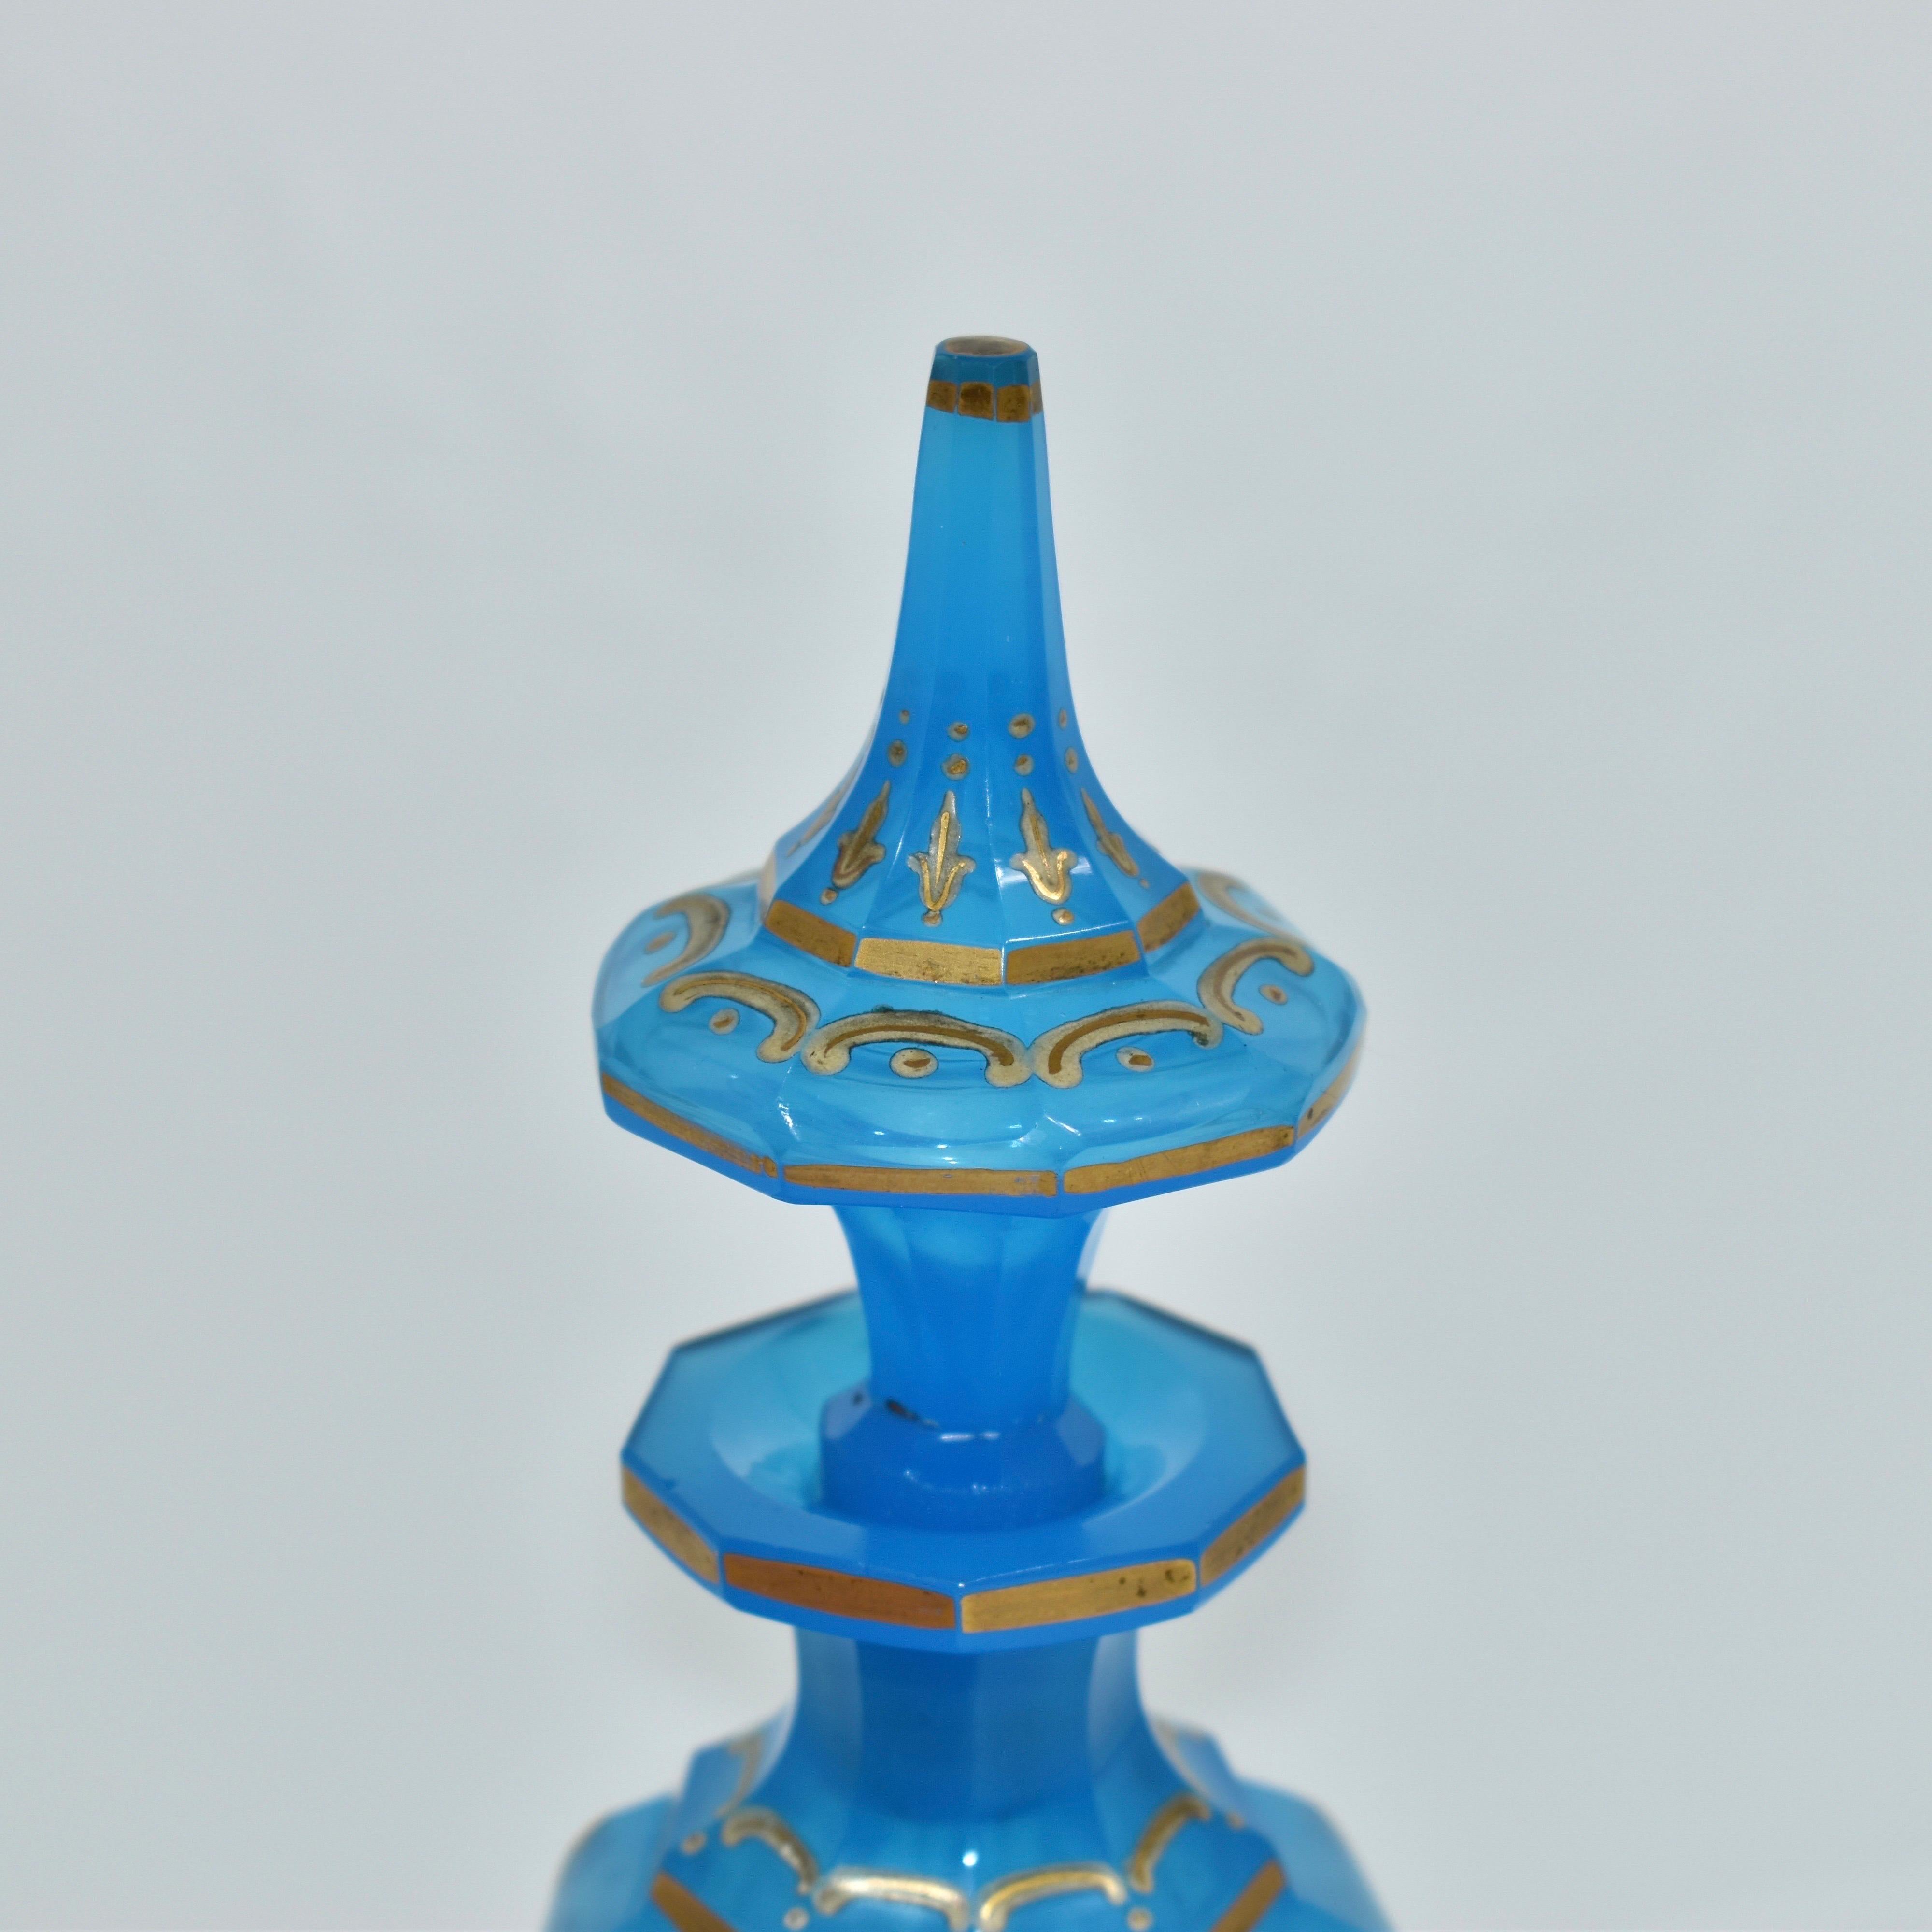 Antique Bohemian Opaline Enameled Glass Perfume Bottle, Flacon, 19th Century In Good Condition For Sale In Rostock, MV